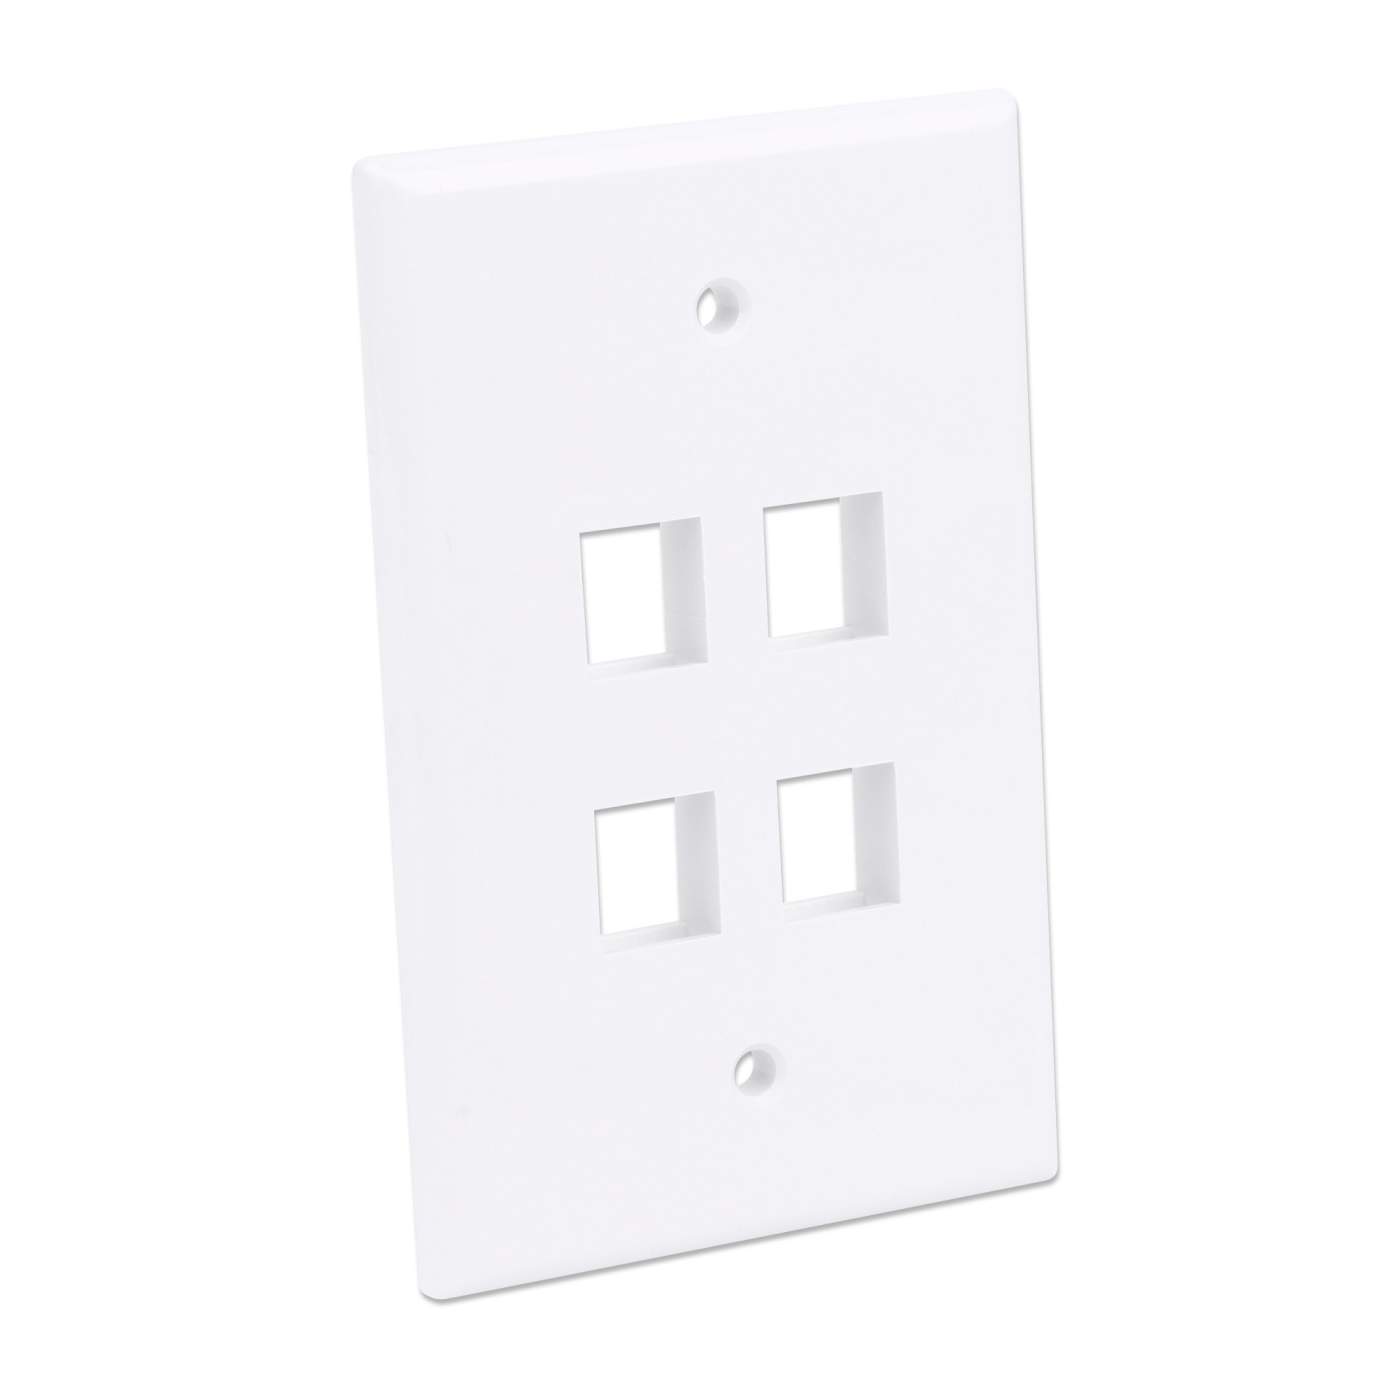 4-Outlet Oversized Keystone Wall Plate Image 3